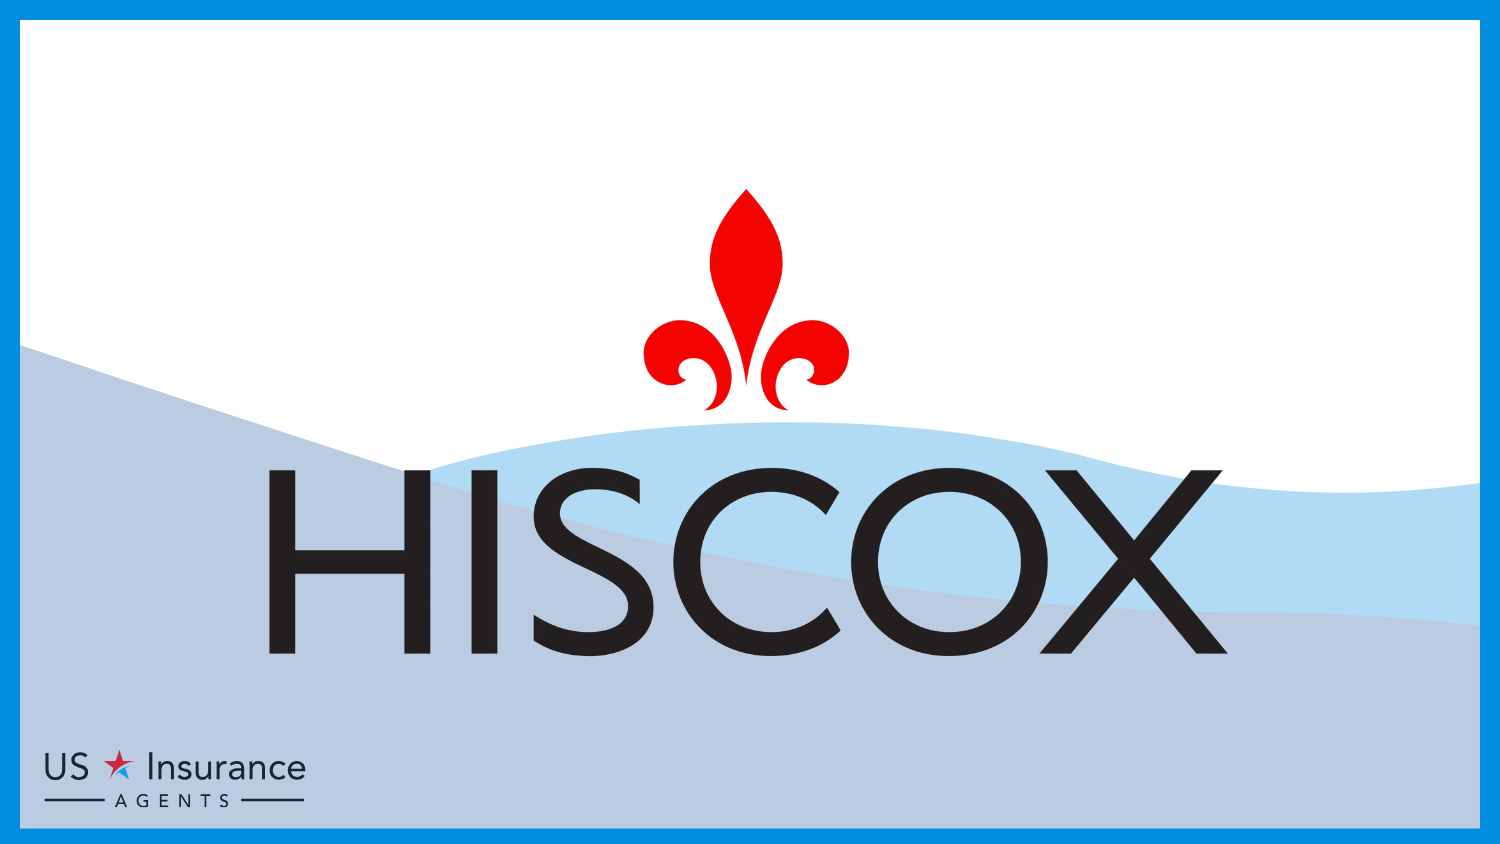 Hiscox: Best Business Insurance for Charter Fishing Boat Services